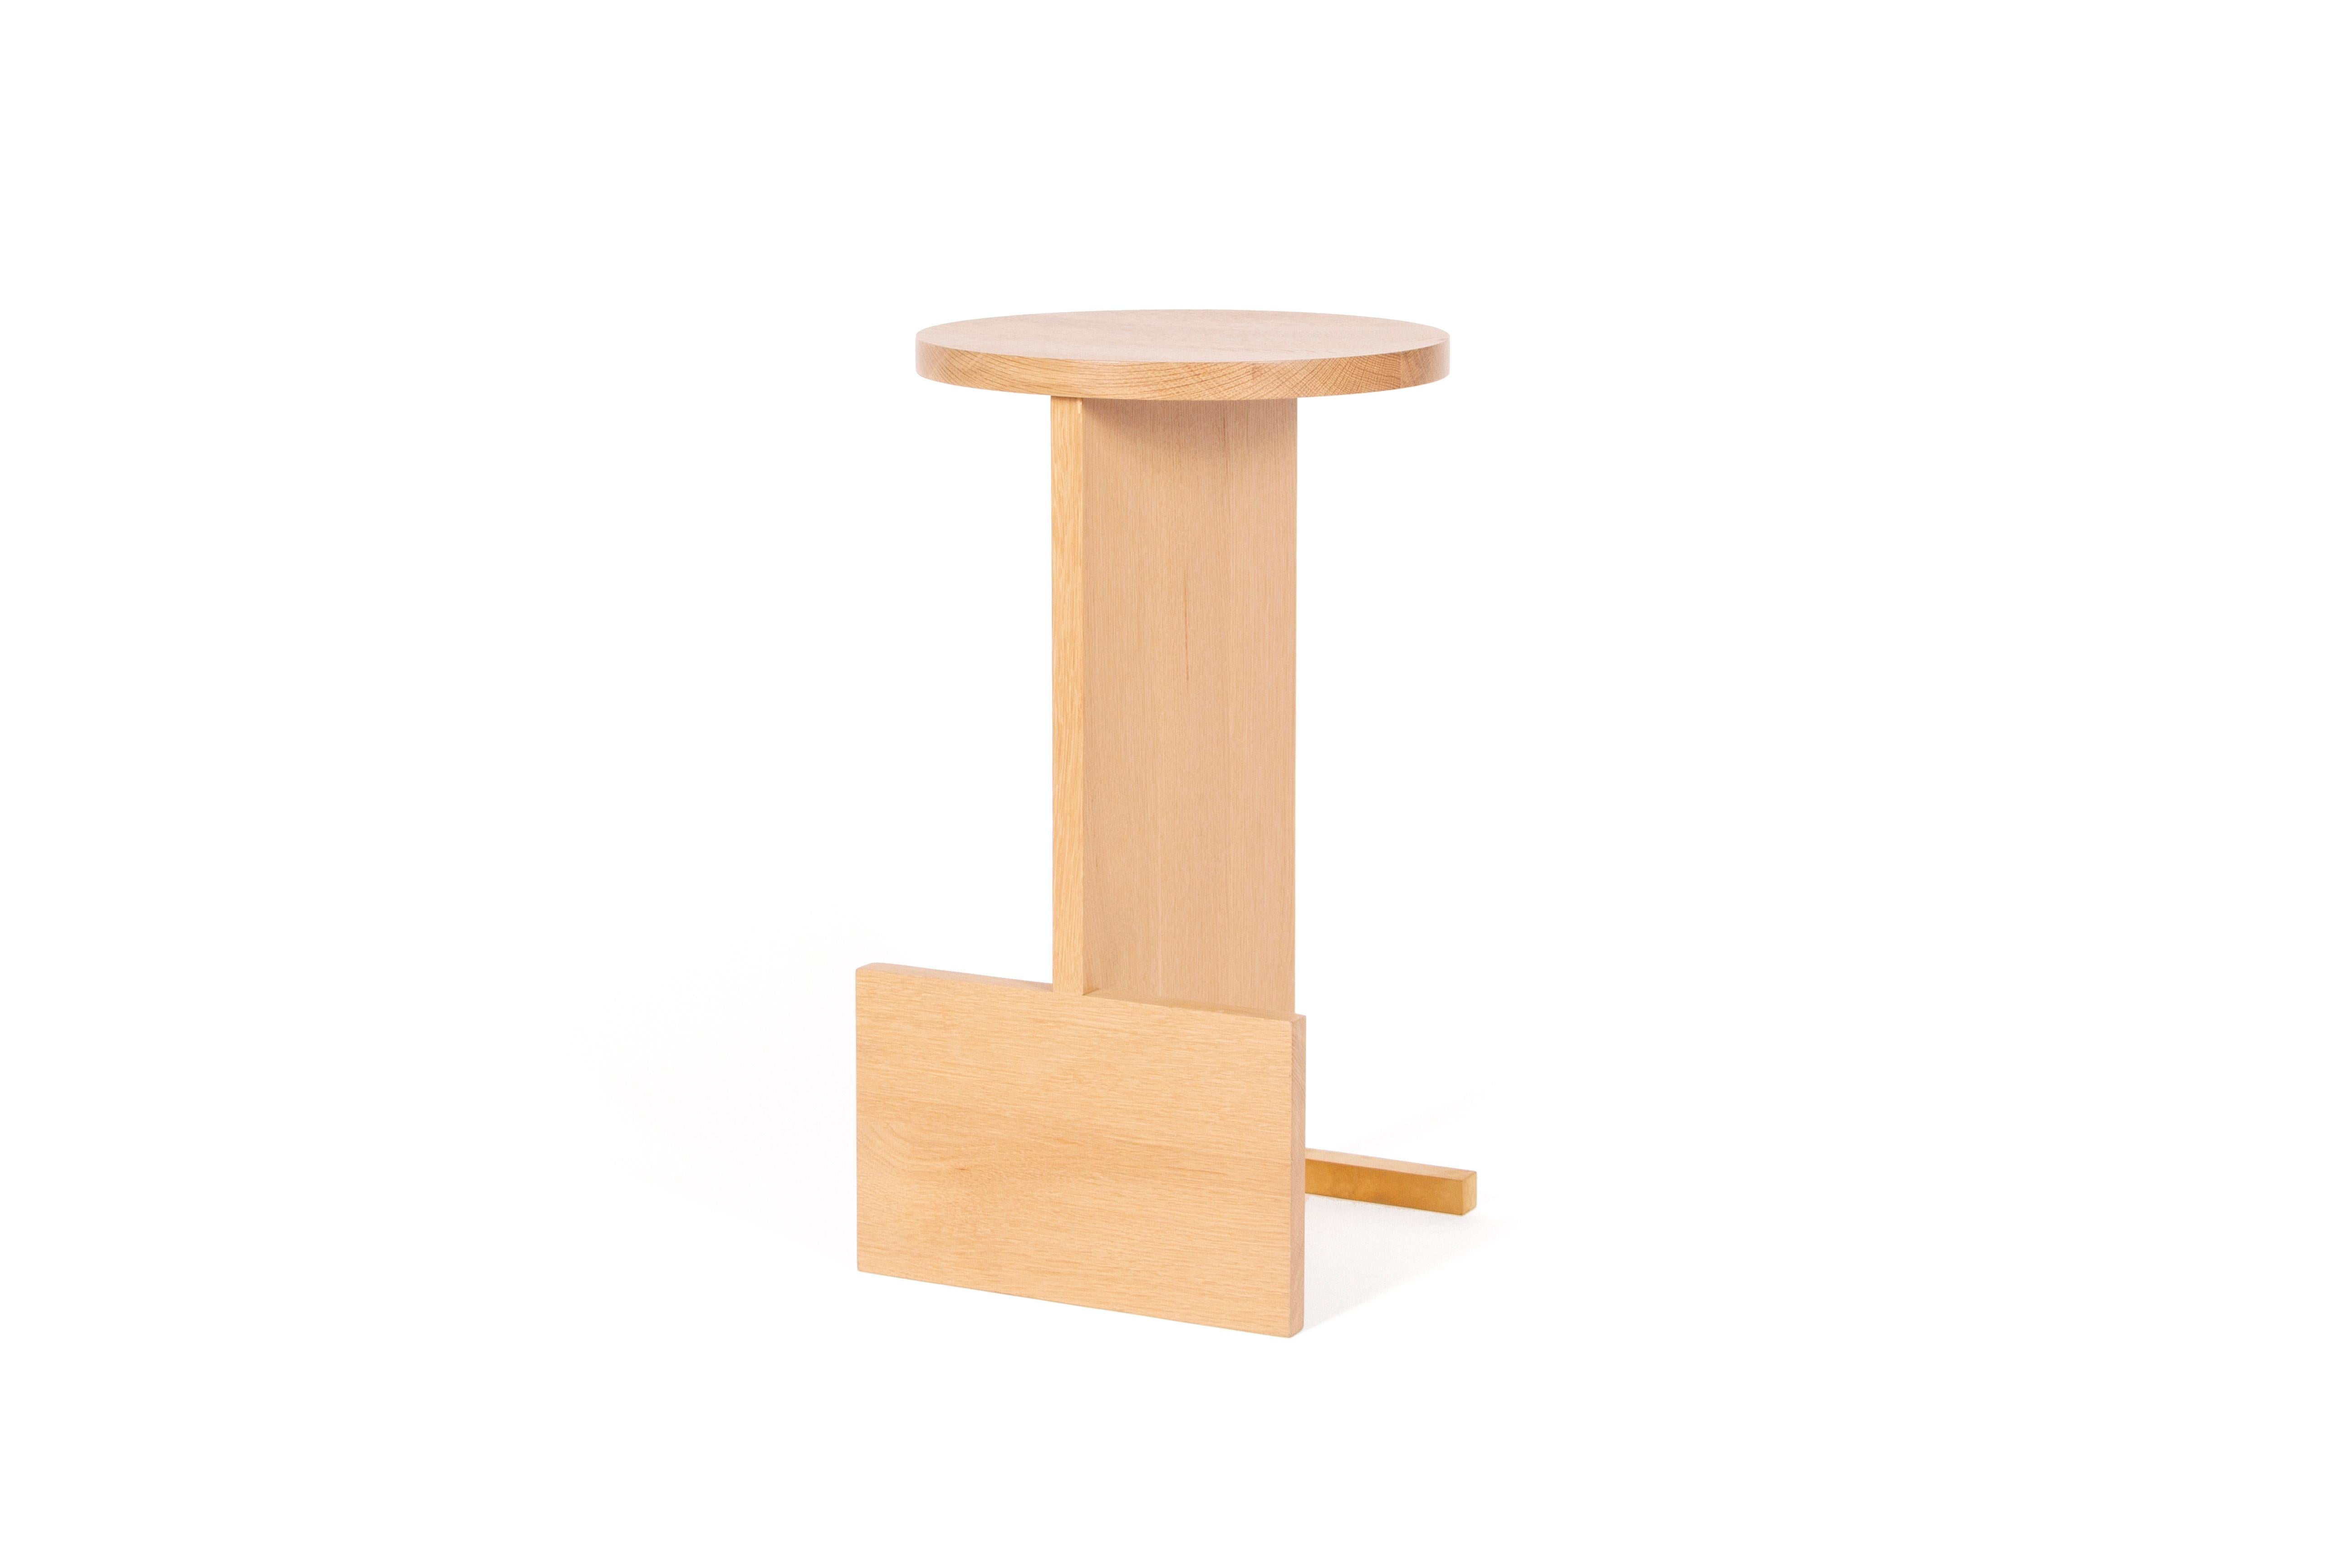 Counter stool by Estudio Persona
Dimensions: D 33 x H 61 cm
Materials: White oak, brass support

Counter stool in solid white oak with brass support.
Also available in walnut or maple.
Customizations available.

Estudio Persona was created